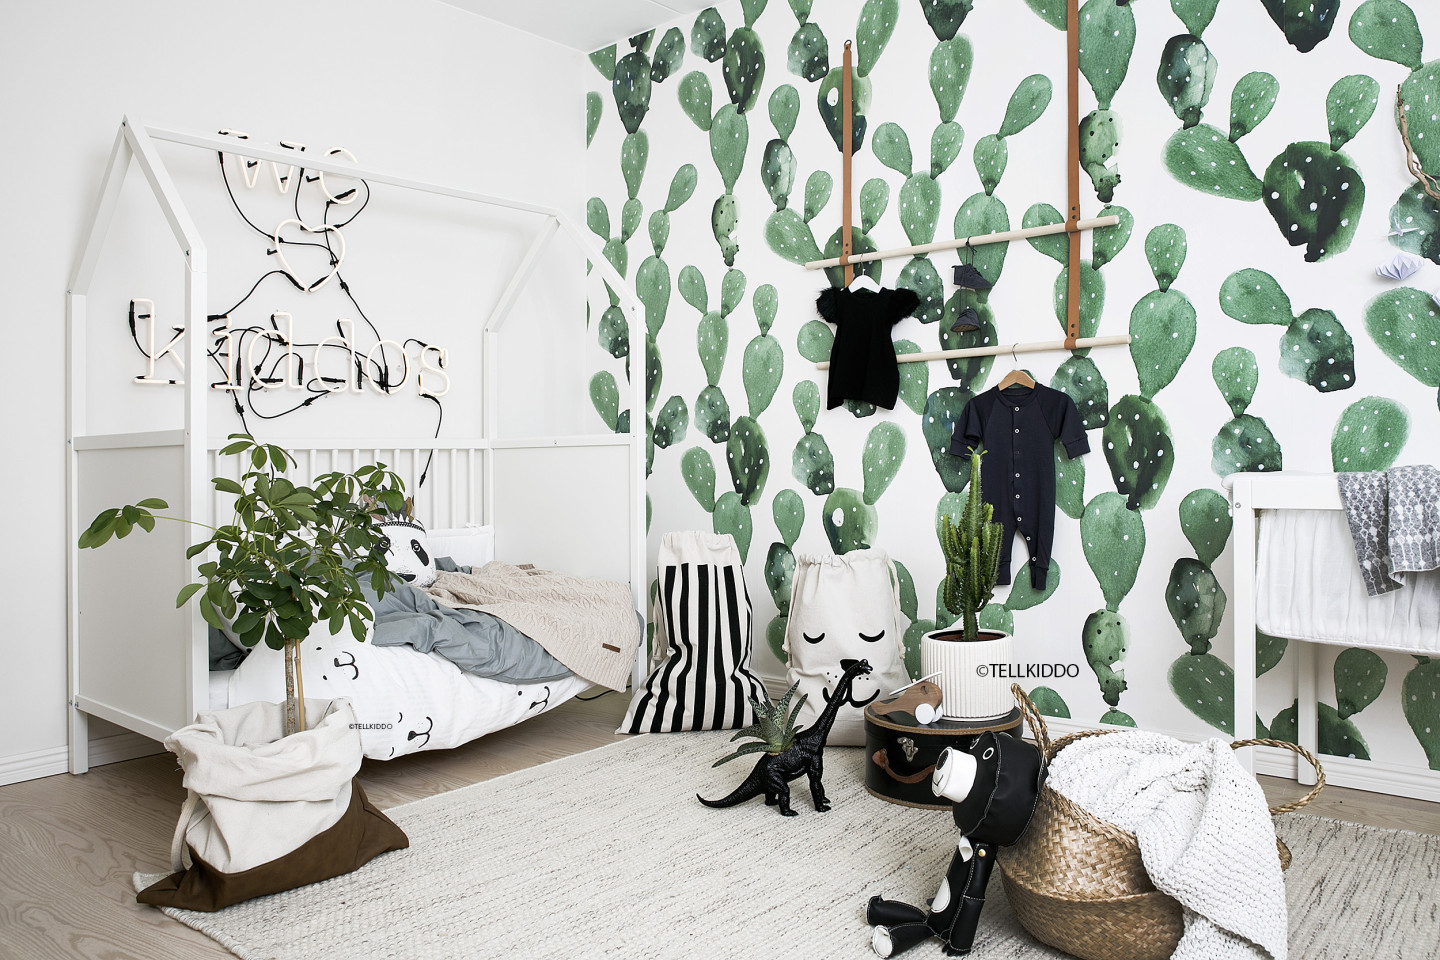 Tellkiddo Black and White Nursery featuring Cactus Wallpaper 